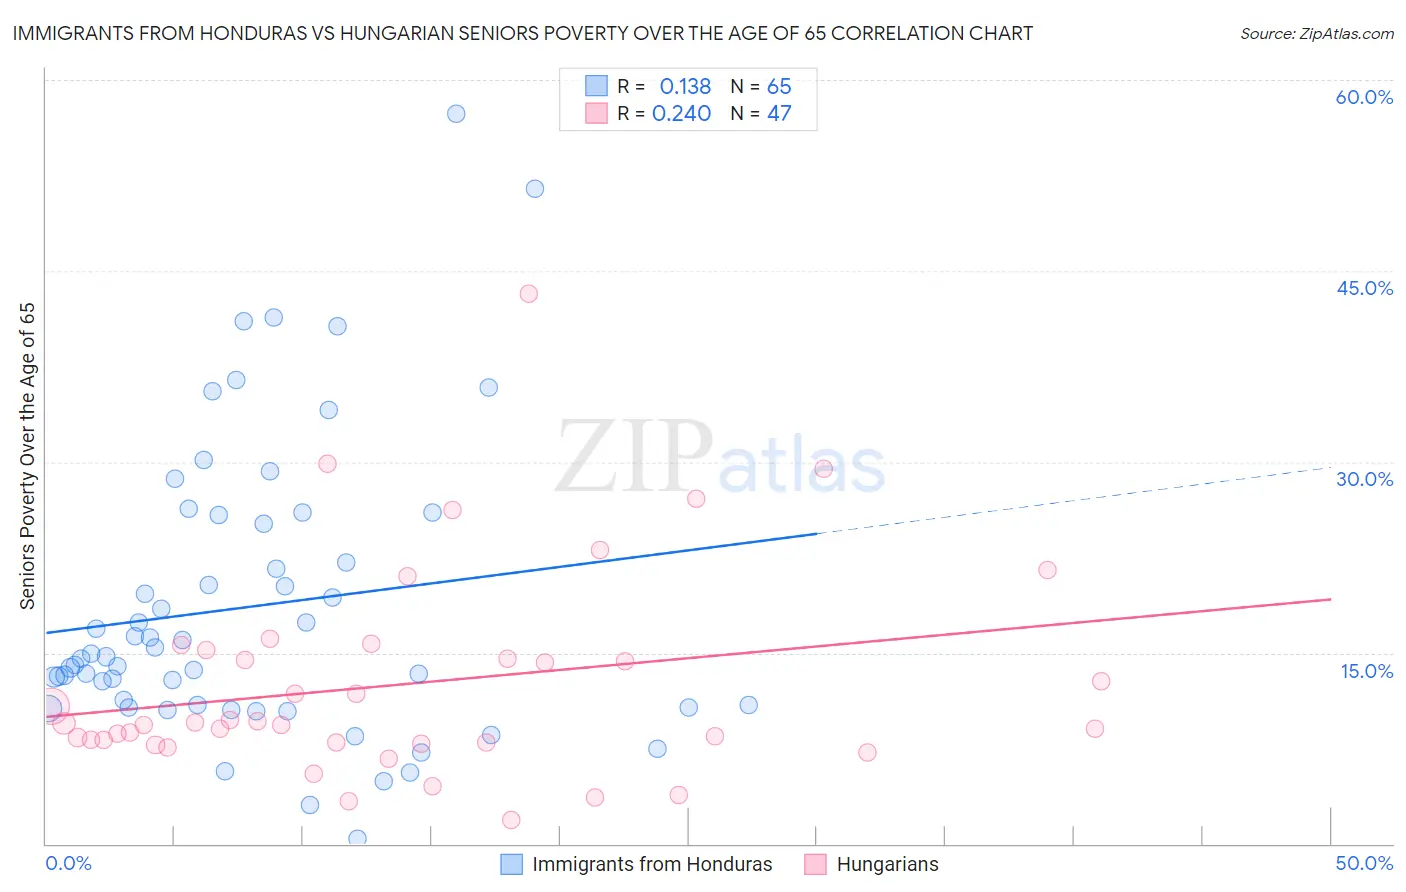 Immigrants from Honduras vs Hungarian Seniors Poverty Over the Age of 65